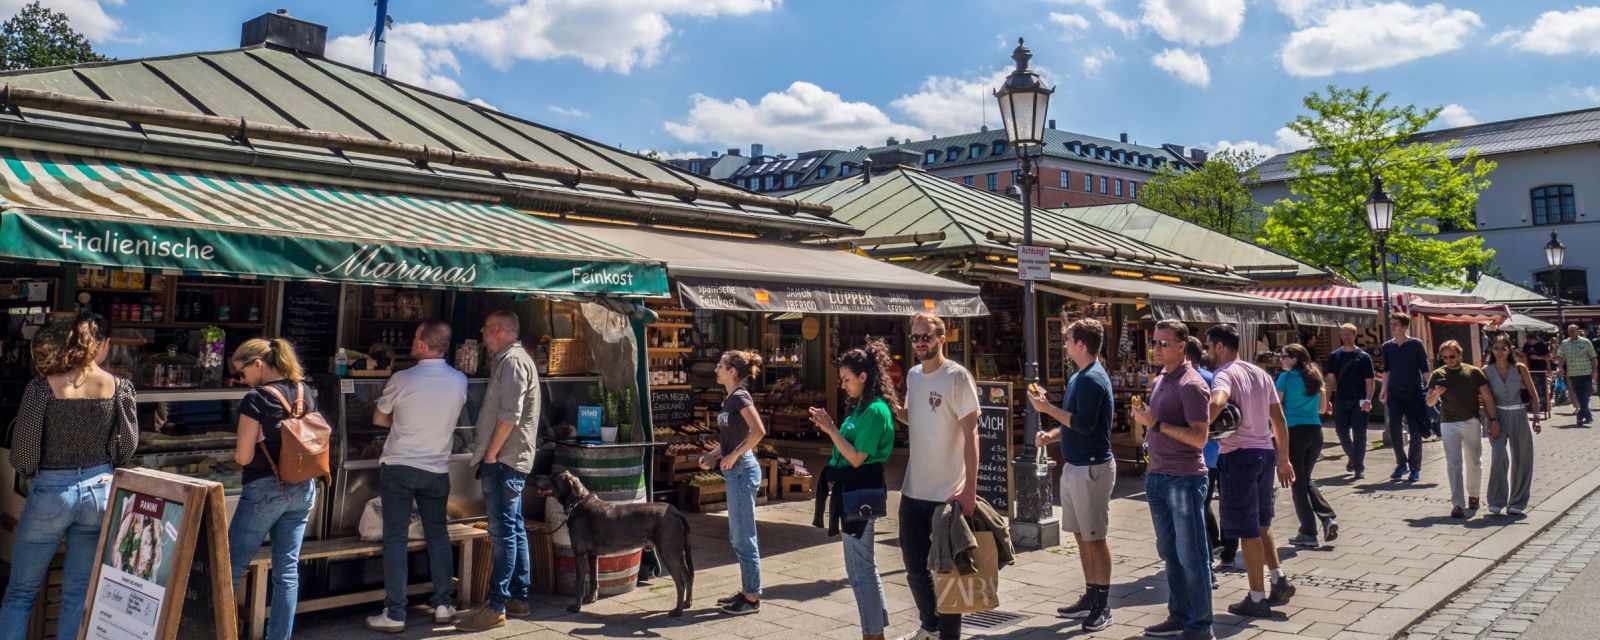 Viktualienmarkt – Food and Stall Guide for the Victuals Market in Munich